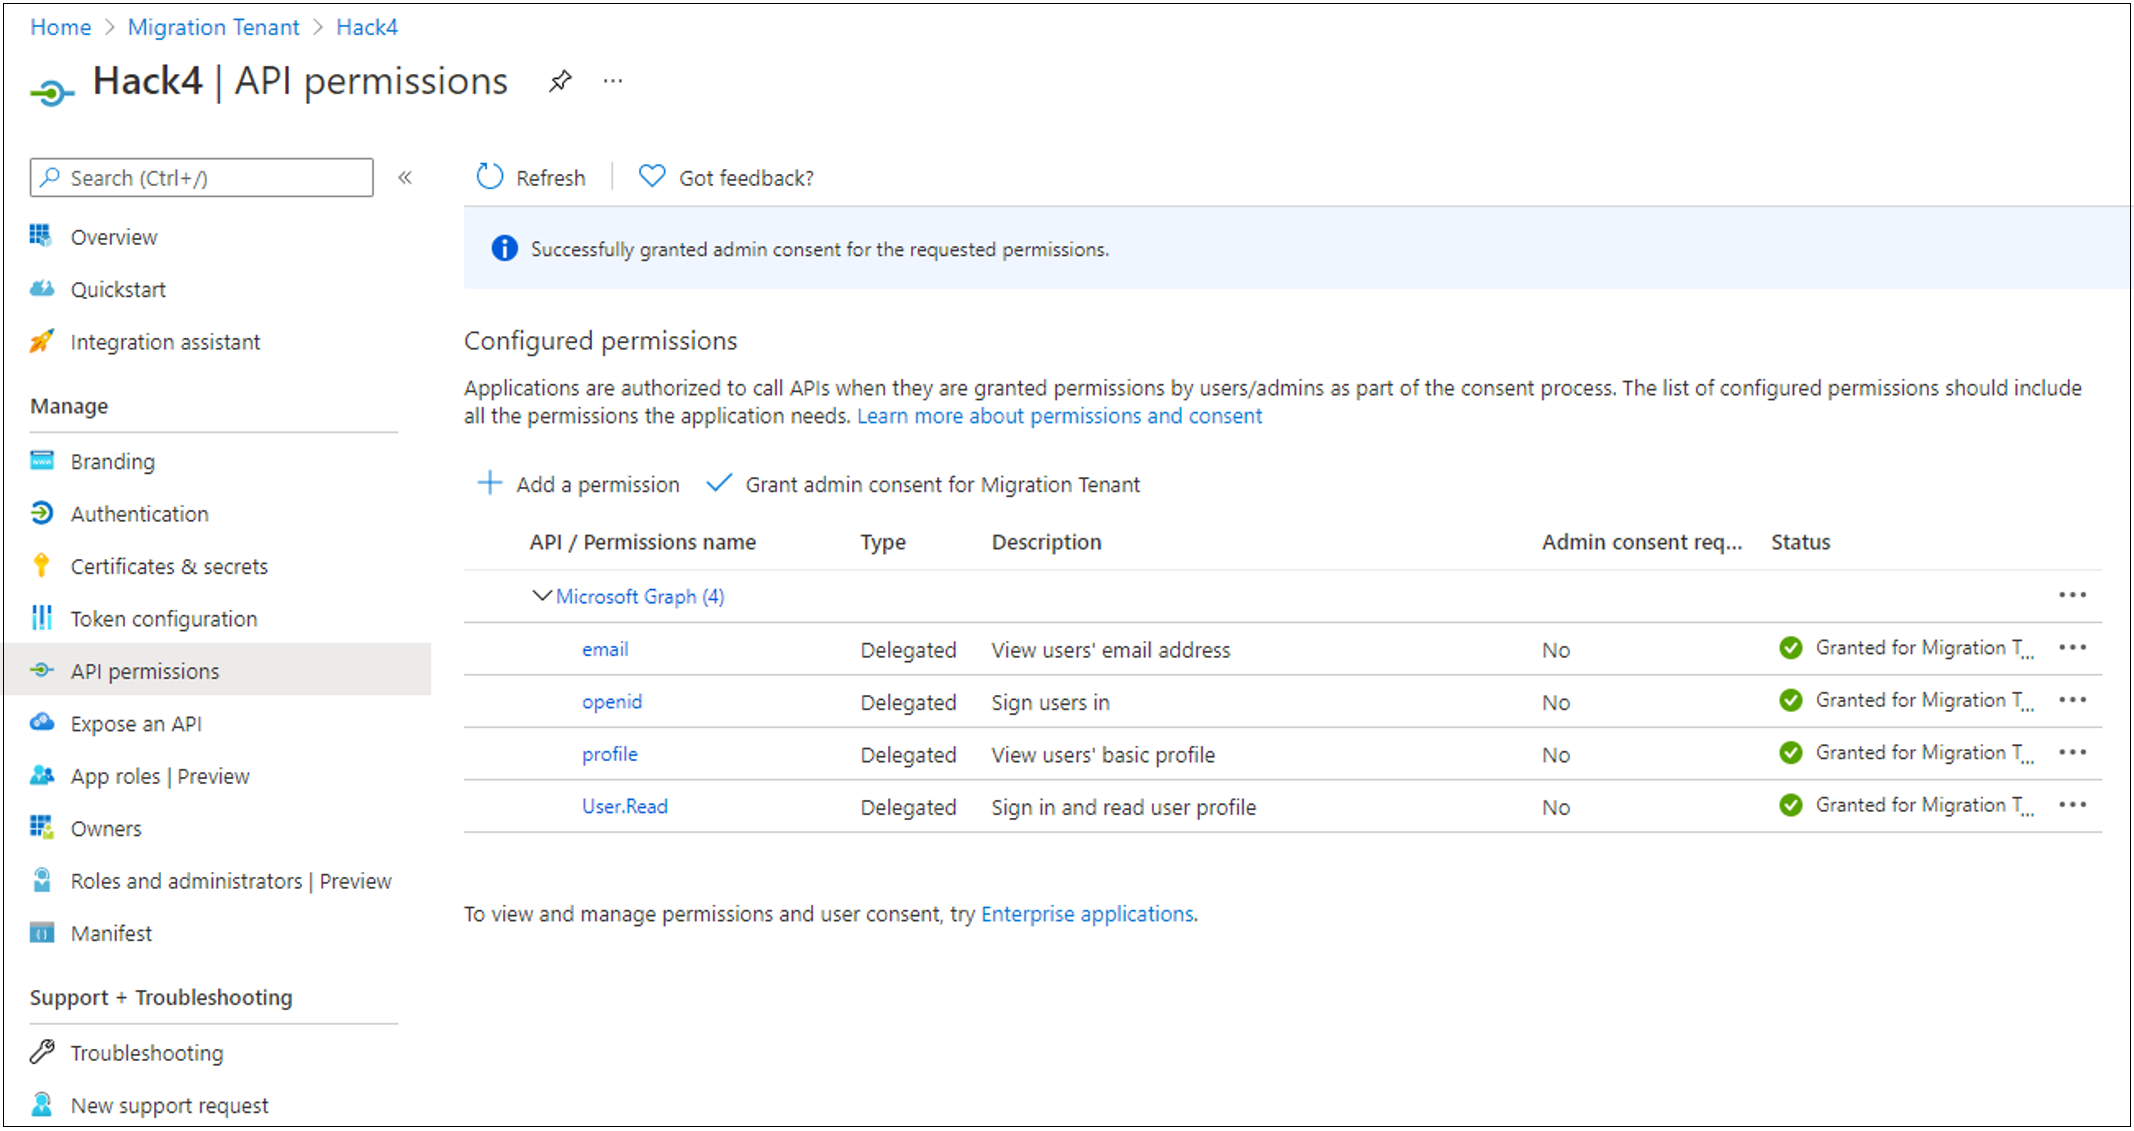 Screenshot of the Successfully granted admin consent for the requested permissions message, under API permissions.